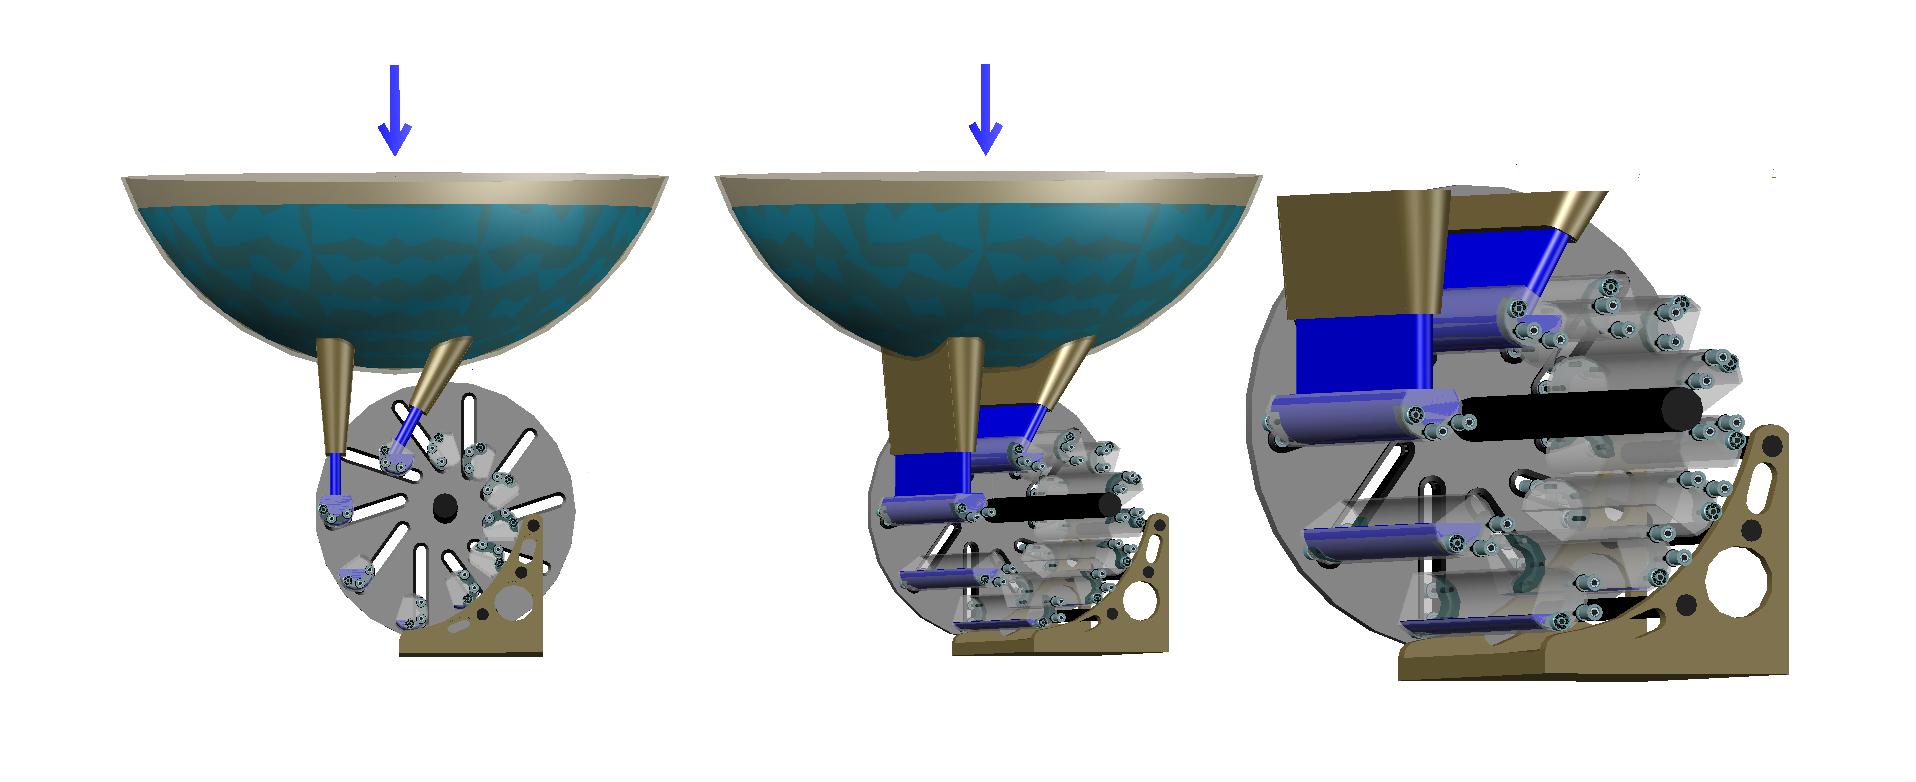 The appearance variant of design motor rotor (shown in three foreshortenings, but without the front disk), equipped by hollow movable blades, which is under the impact of the water pressure coming from the two nozzles.